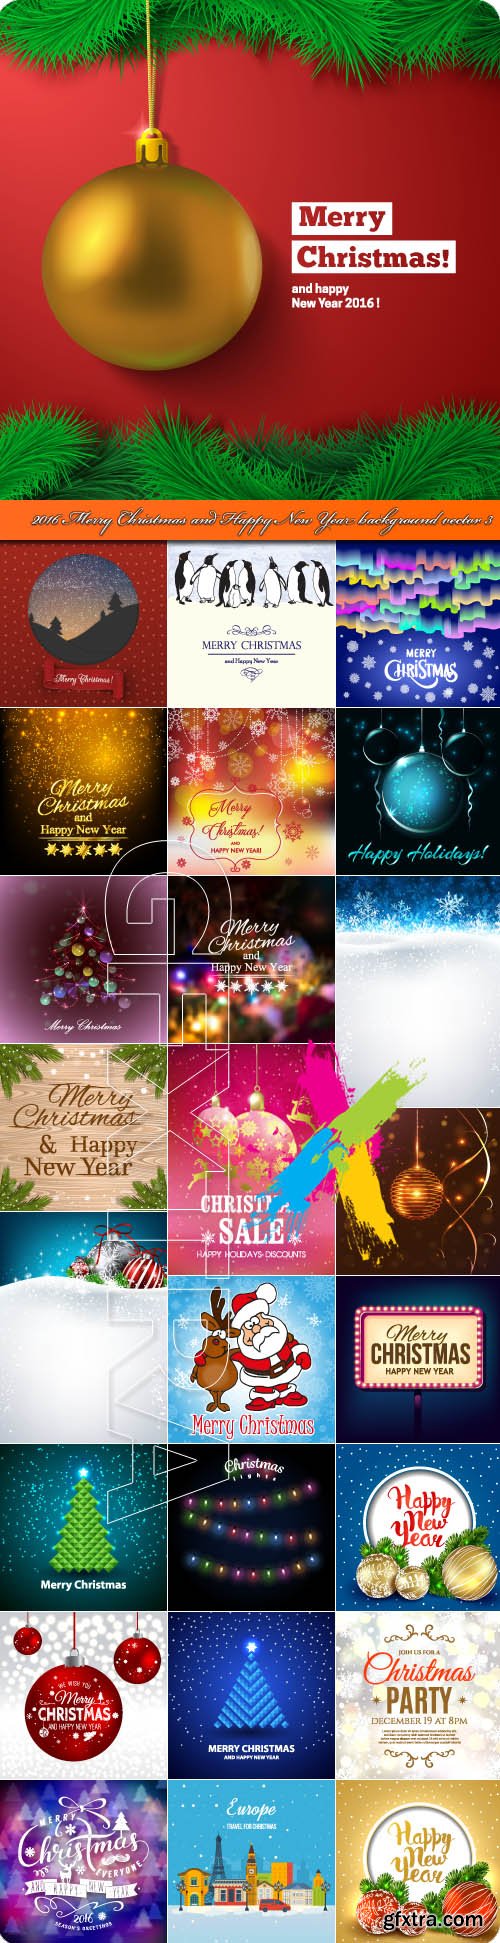 2016 Merry Christmas and Happy New Year background vector 3